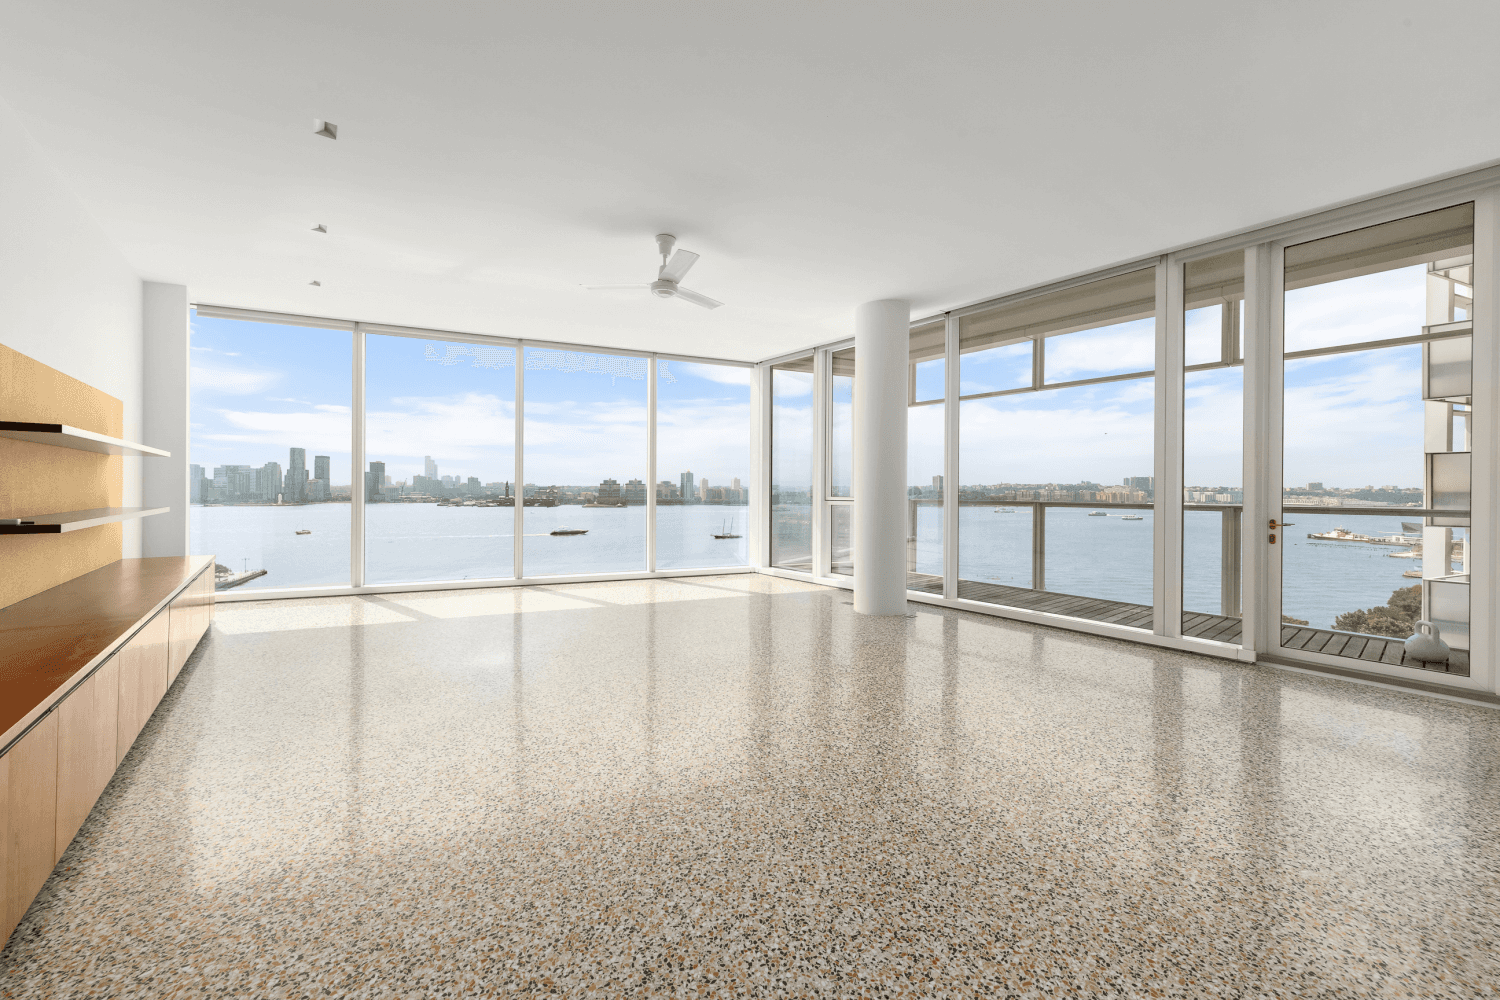 INCREDIBLE OPPORTUNITY awaits at Richard Meier's renowned 165 Charles Street.